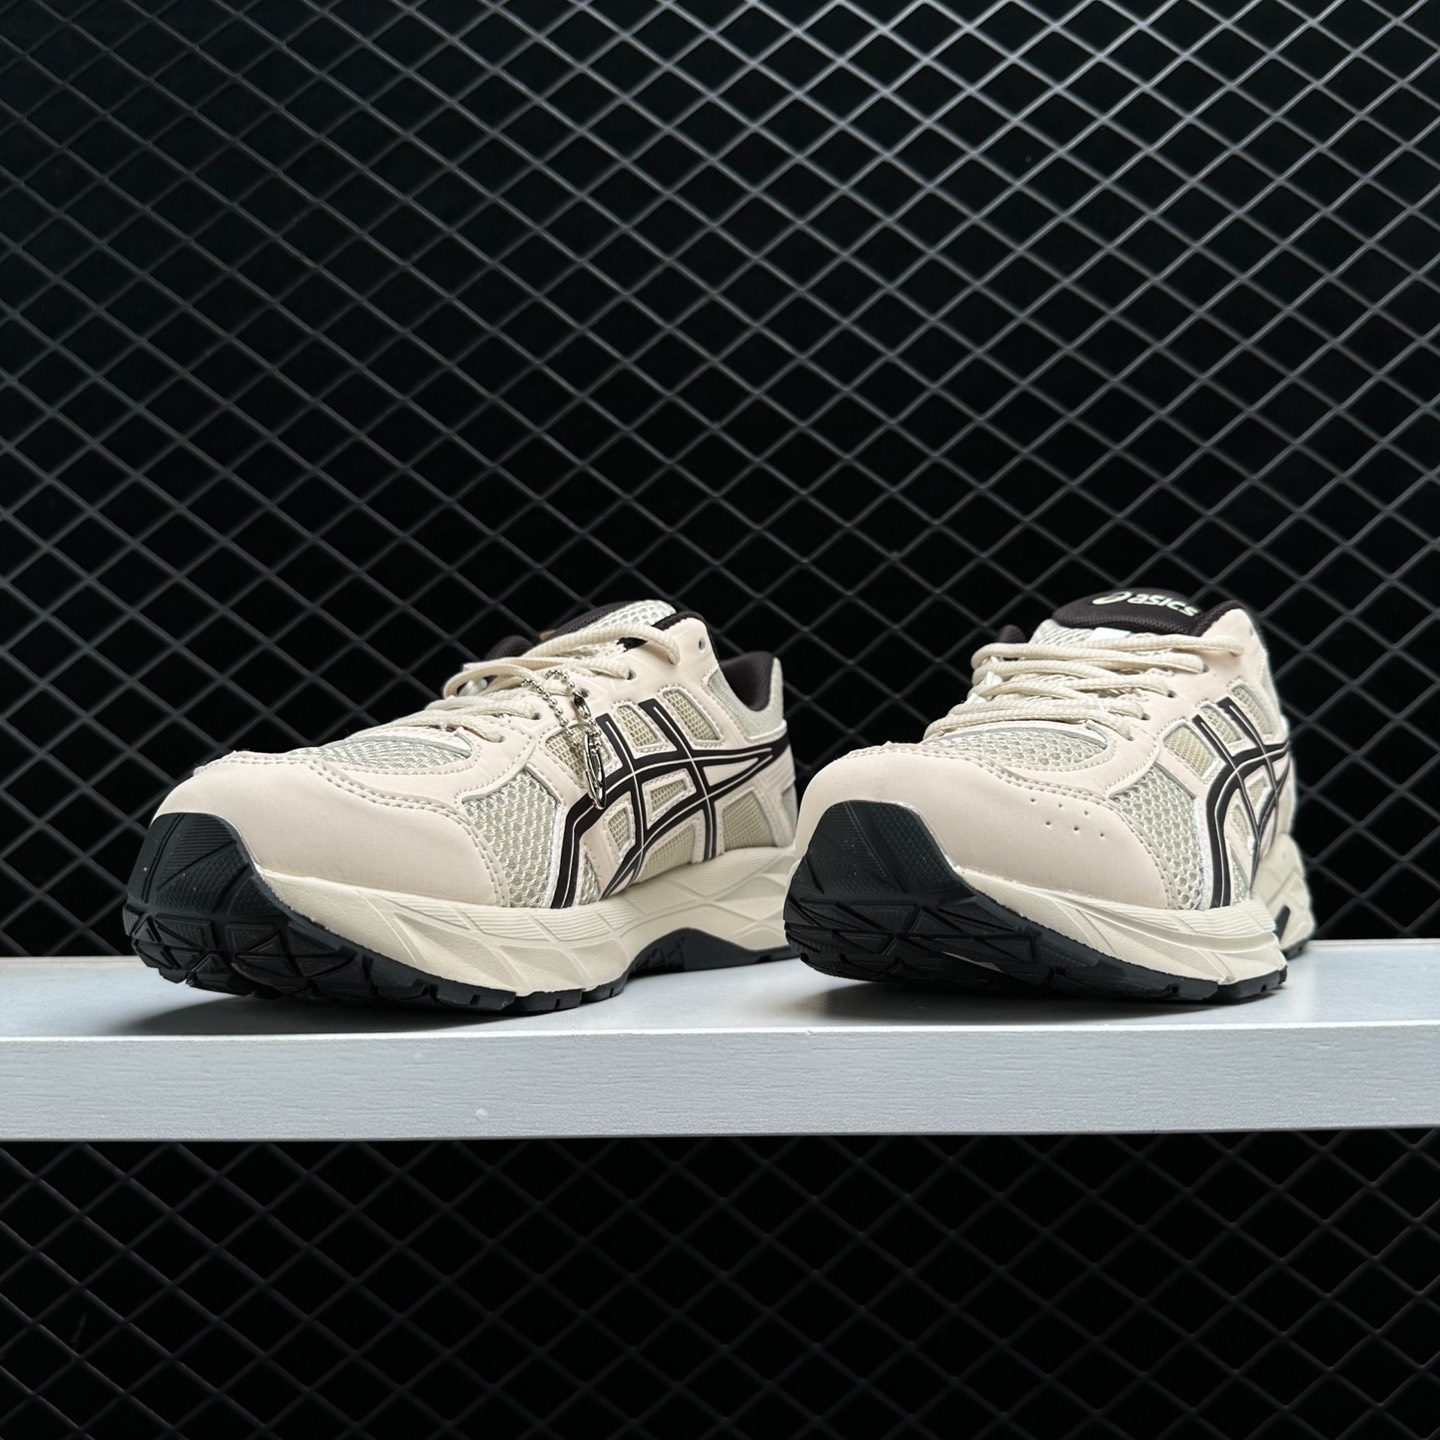 Asics Gel-Contend 4 Creamwhite Black T8D9Q-112 | Affordable Running Shoes